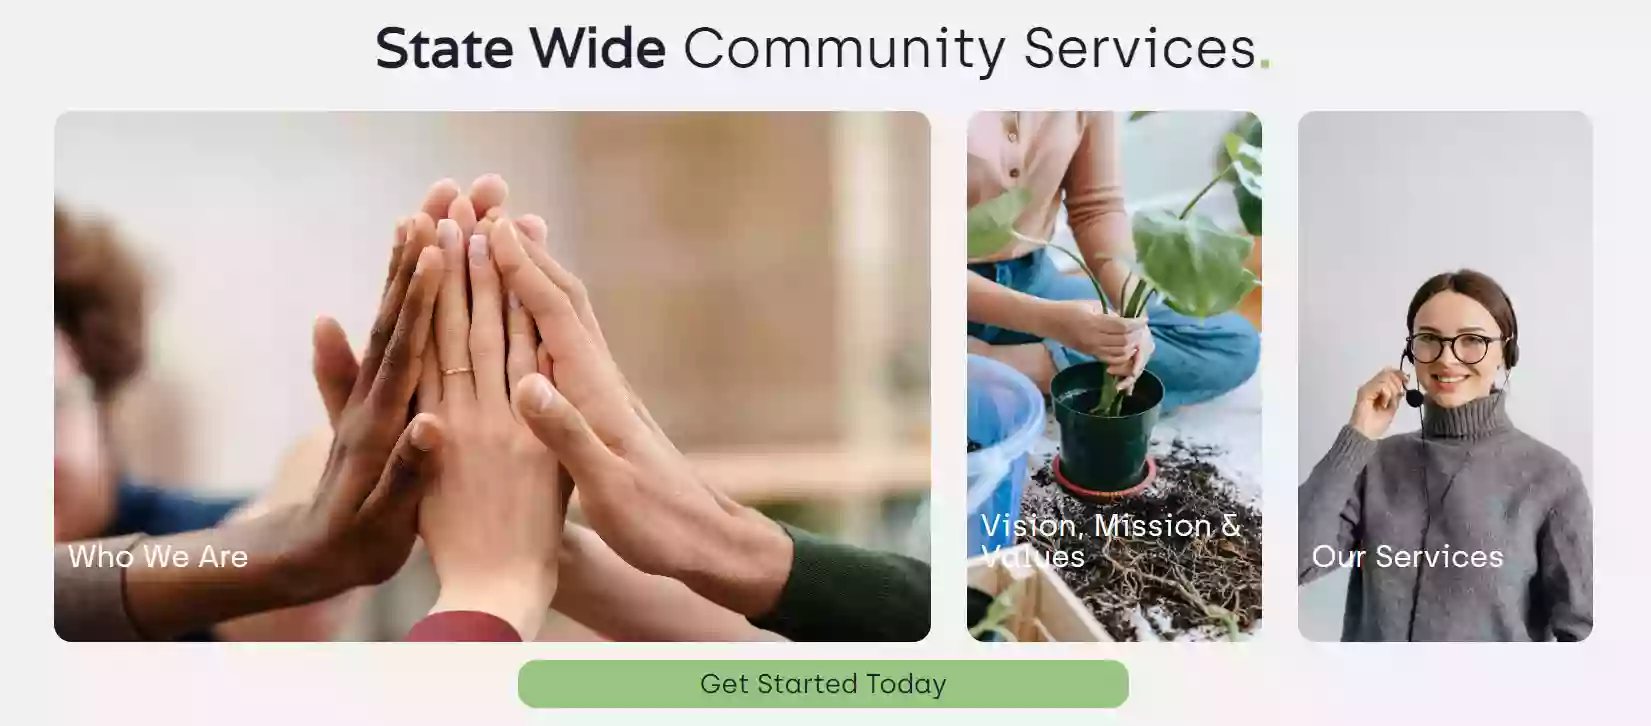 State Wide Community Services